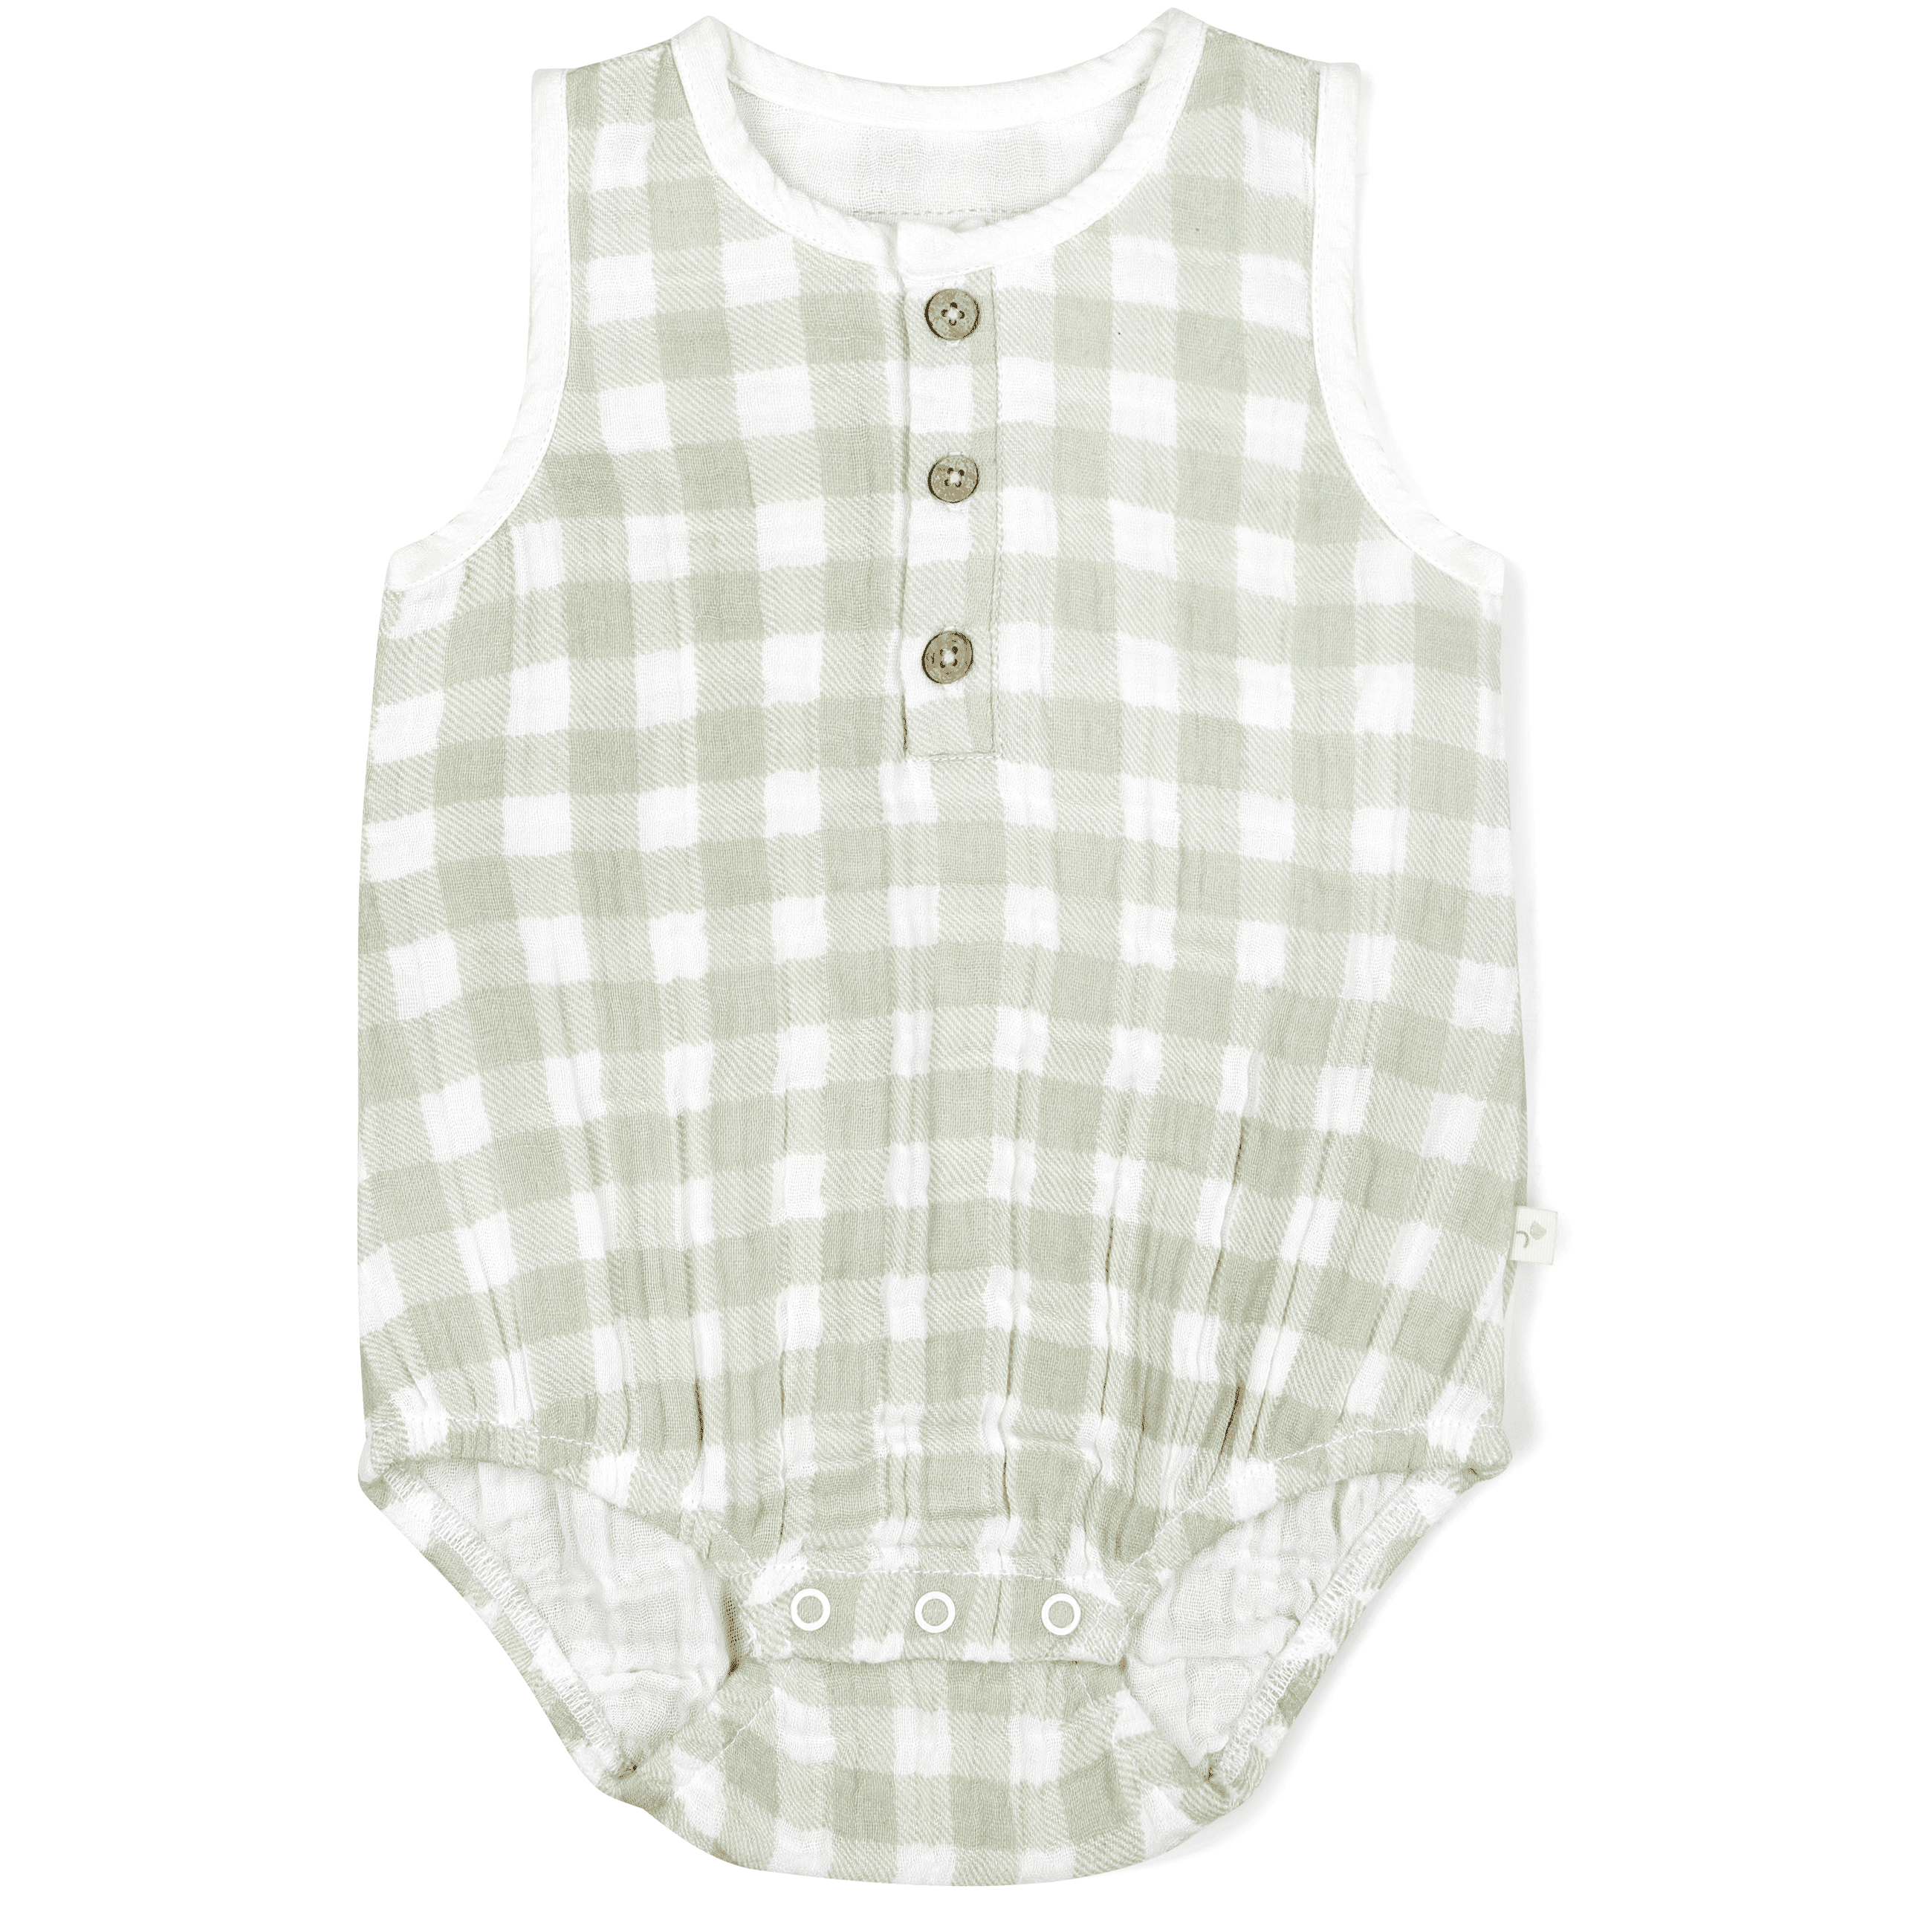 Green and white gingham toddler Organic Muslin Bubble Onesie by Makemake Organics with sleeveless design, button-up front, and snap closures at the bottom, displayed on a white background.